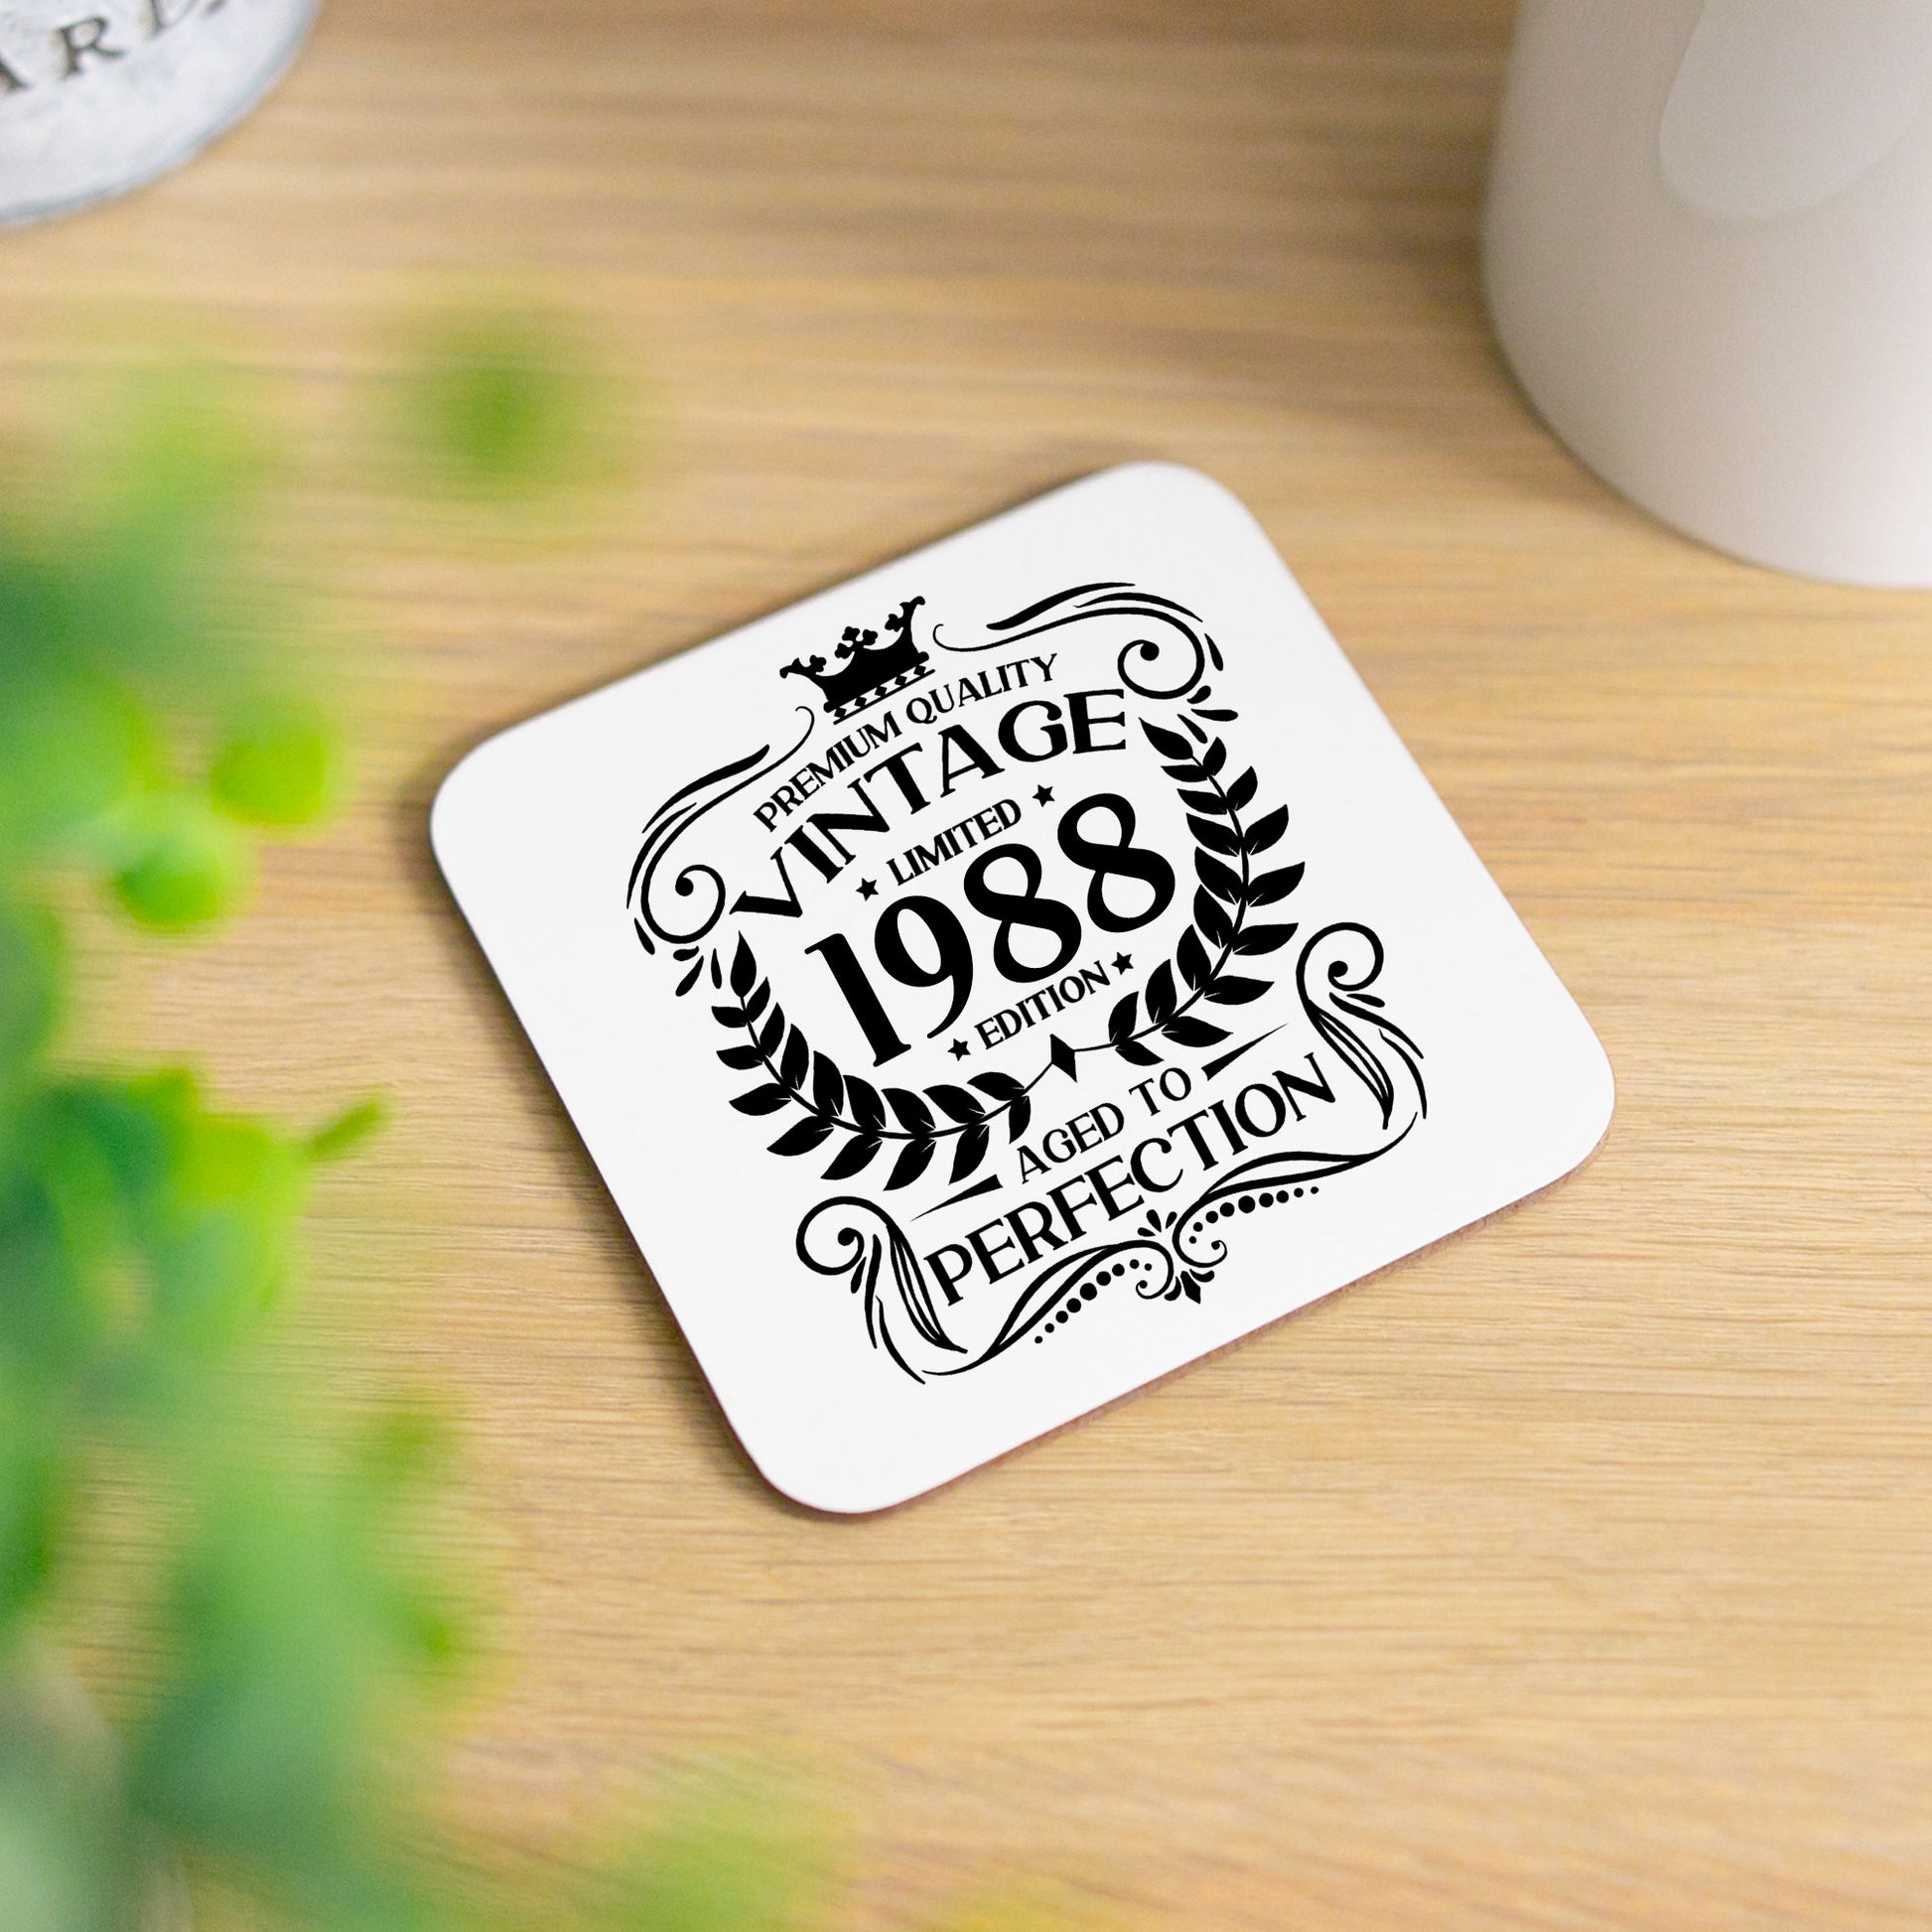 Vintage 1988 35th Birthday Engraved Wine Glass Gift  - Always Looking Good - Glass & Printed Coaster  